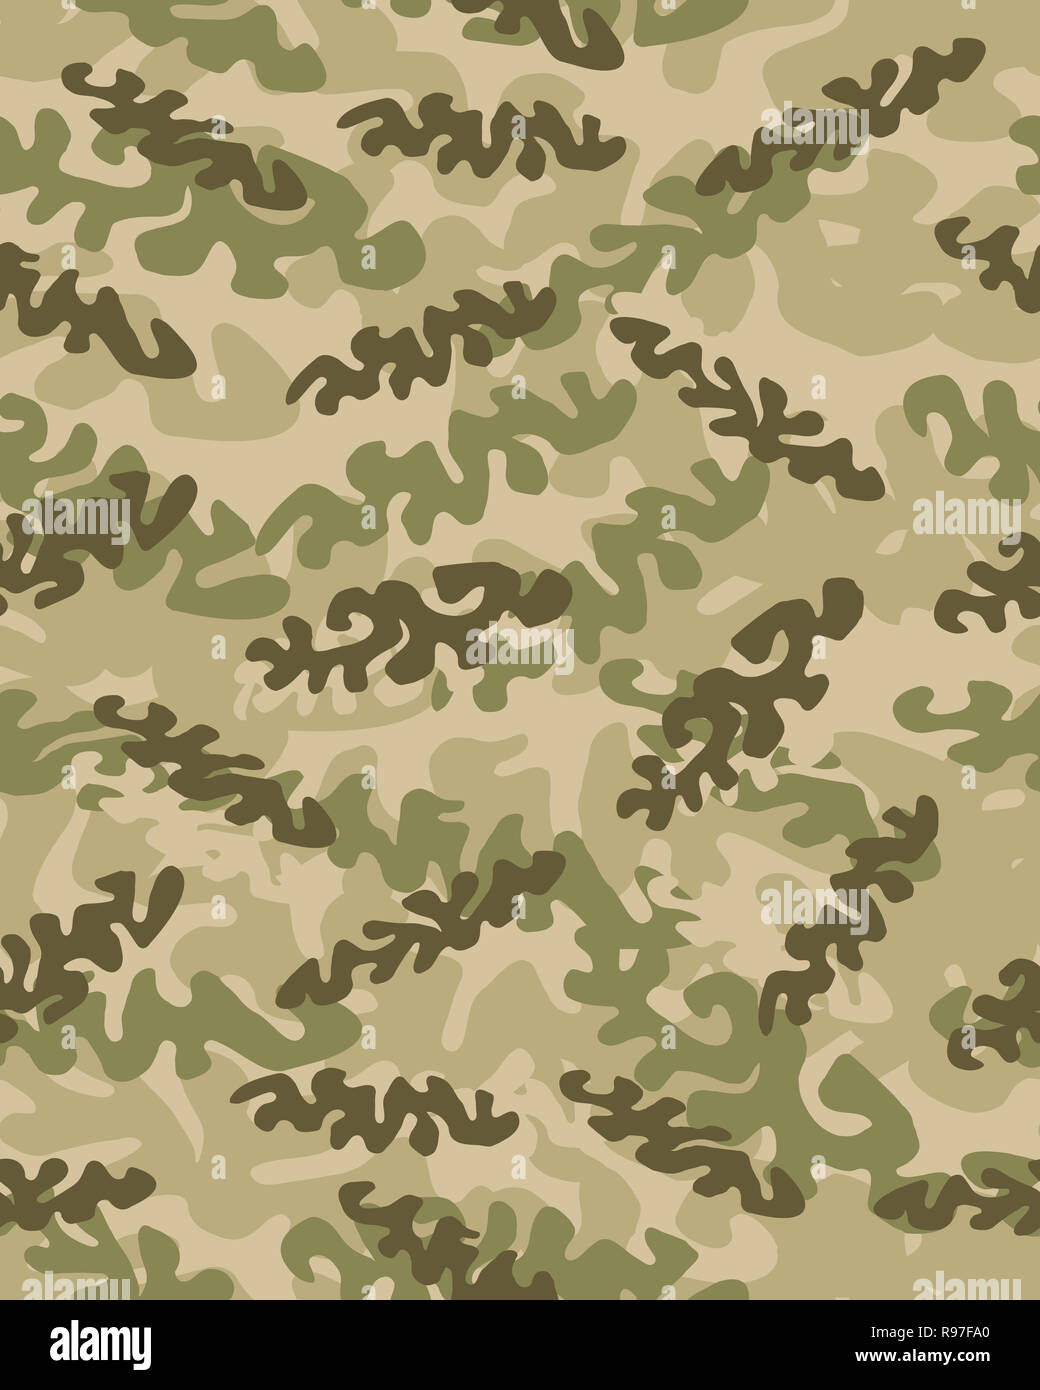 Camouflage pattern background seamless vector illustration. Military fashionable abstract geometric texture. Stock Photo